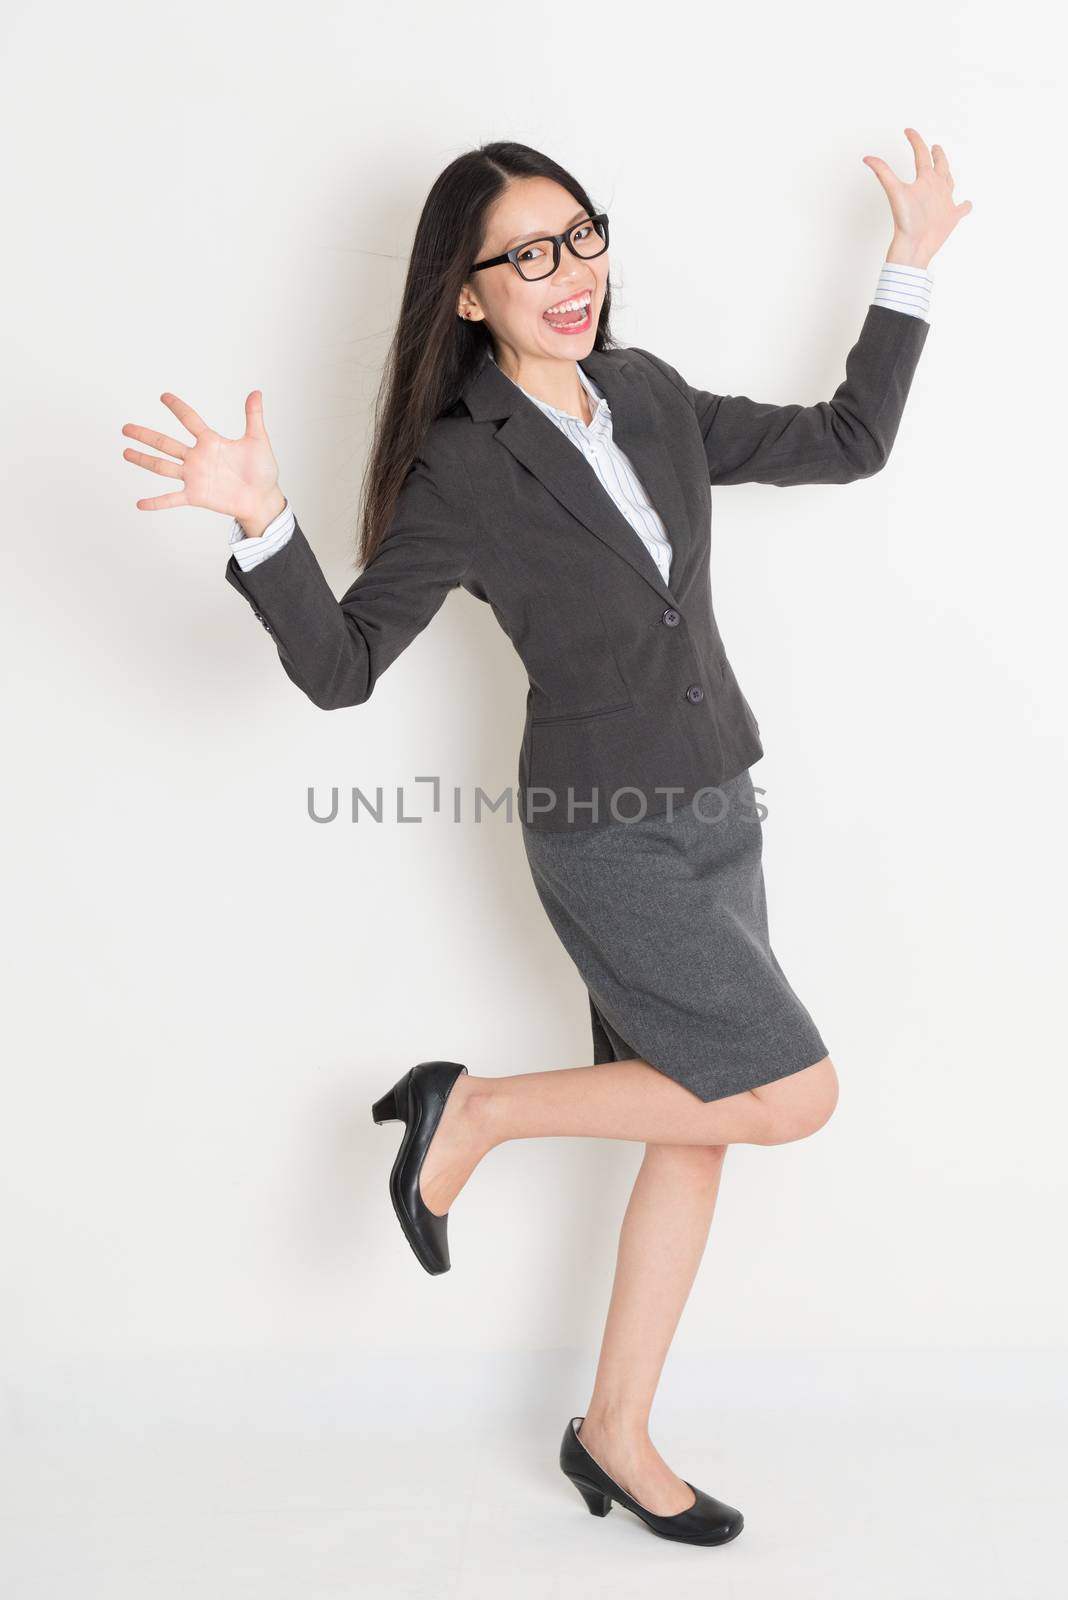 Excited full body Asian business woman standing on plain background.